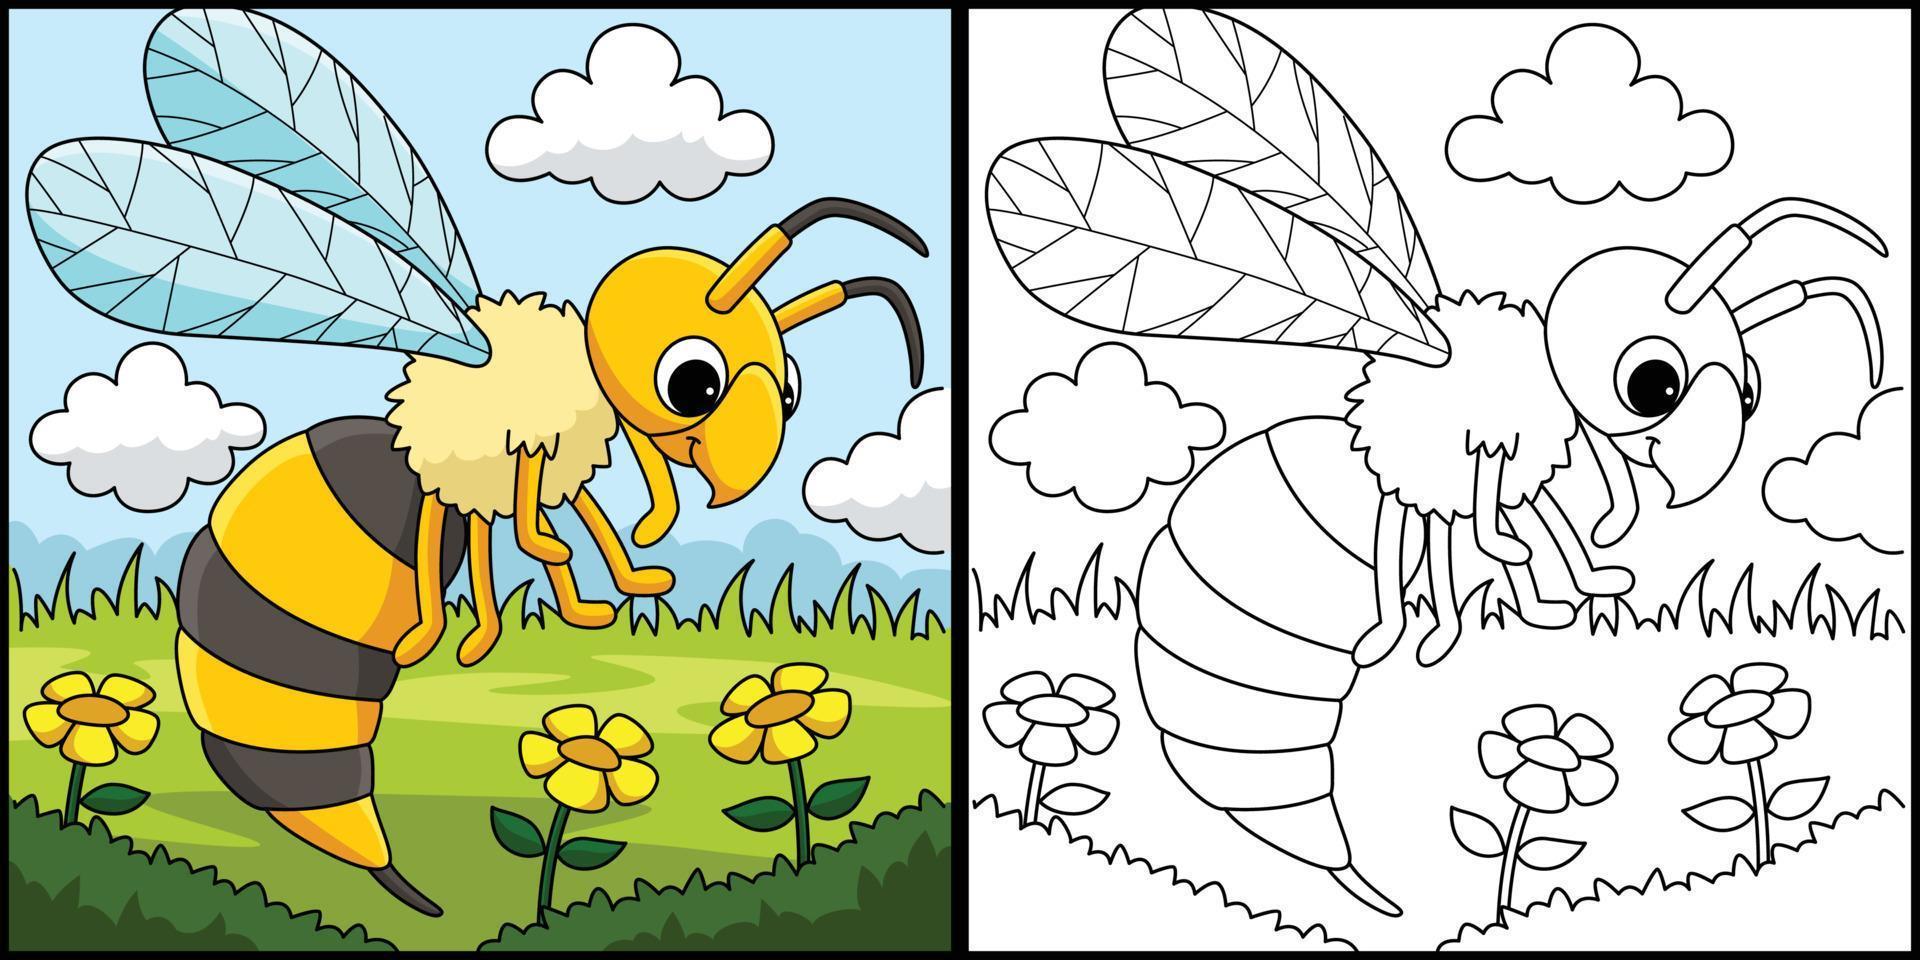 Hornet Animal Coloring Page Colored Illustration vector